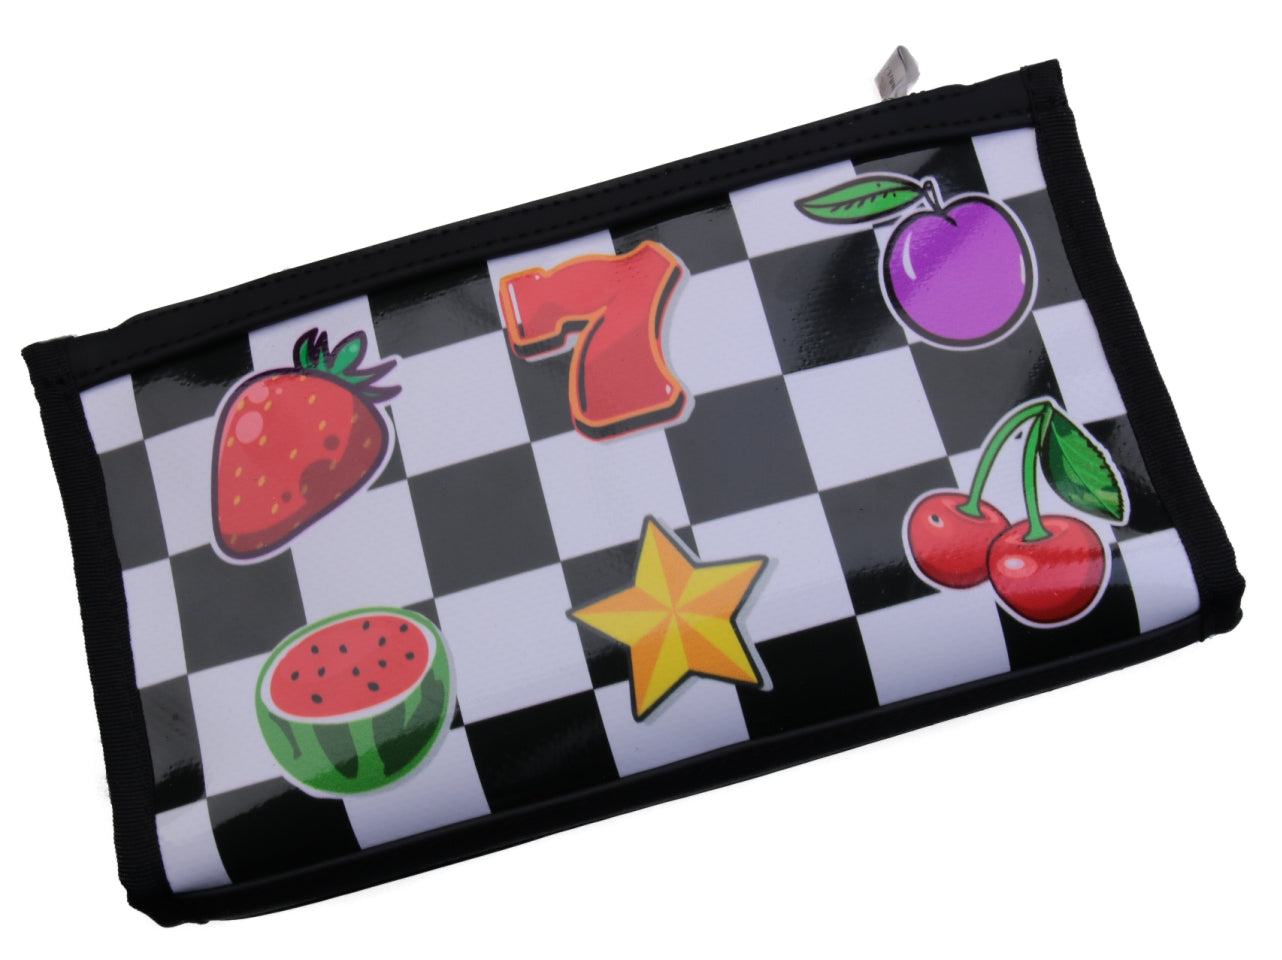 LARGE WOMEN'S WALLET CHESS FANTASY "SLOT MACHINE". MODEL PIT MADE OF LORRY TARPAULIN. - Limited Edition Paul Meccanico